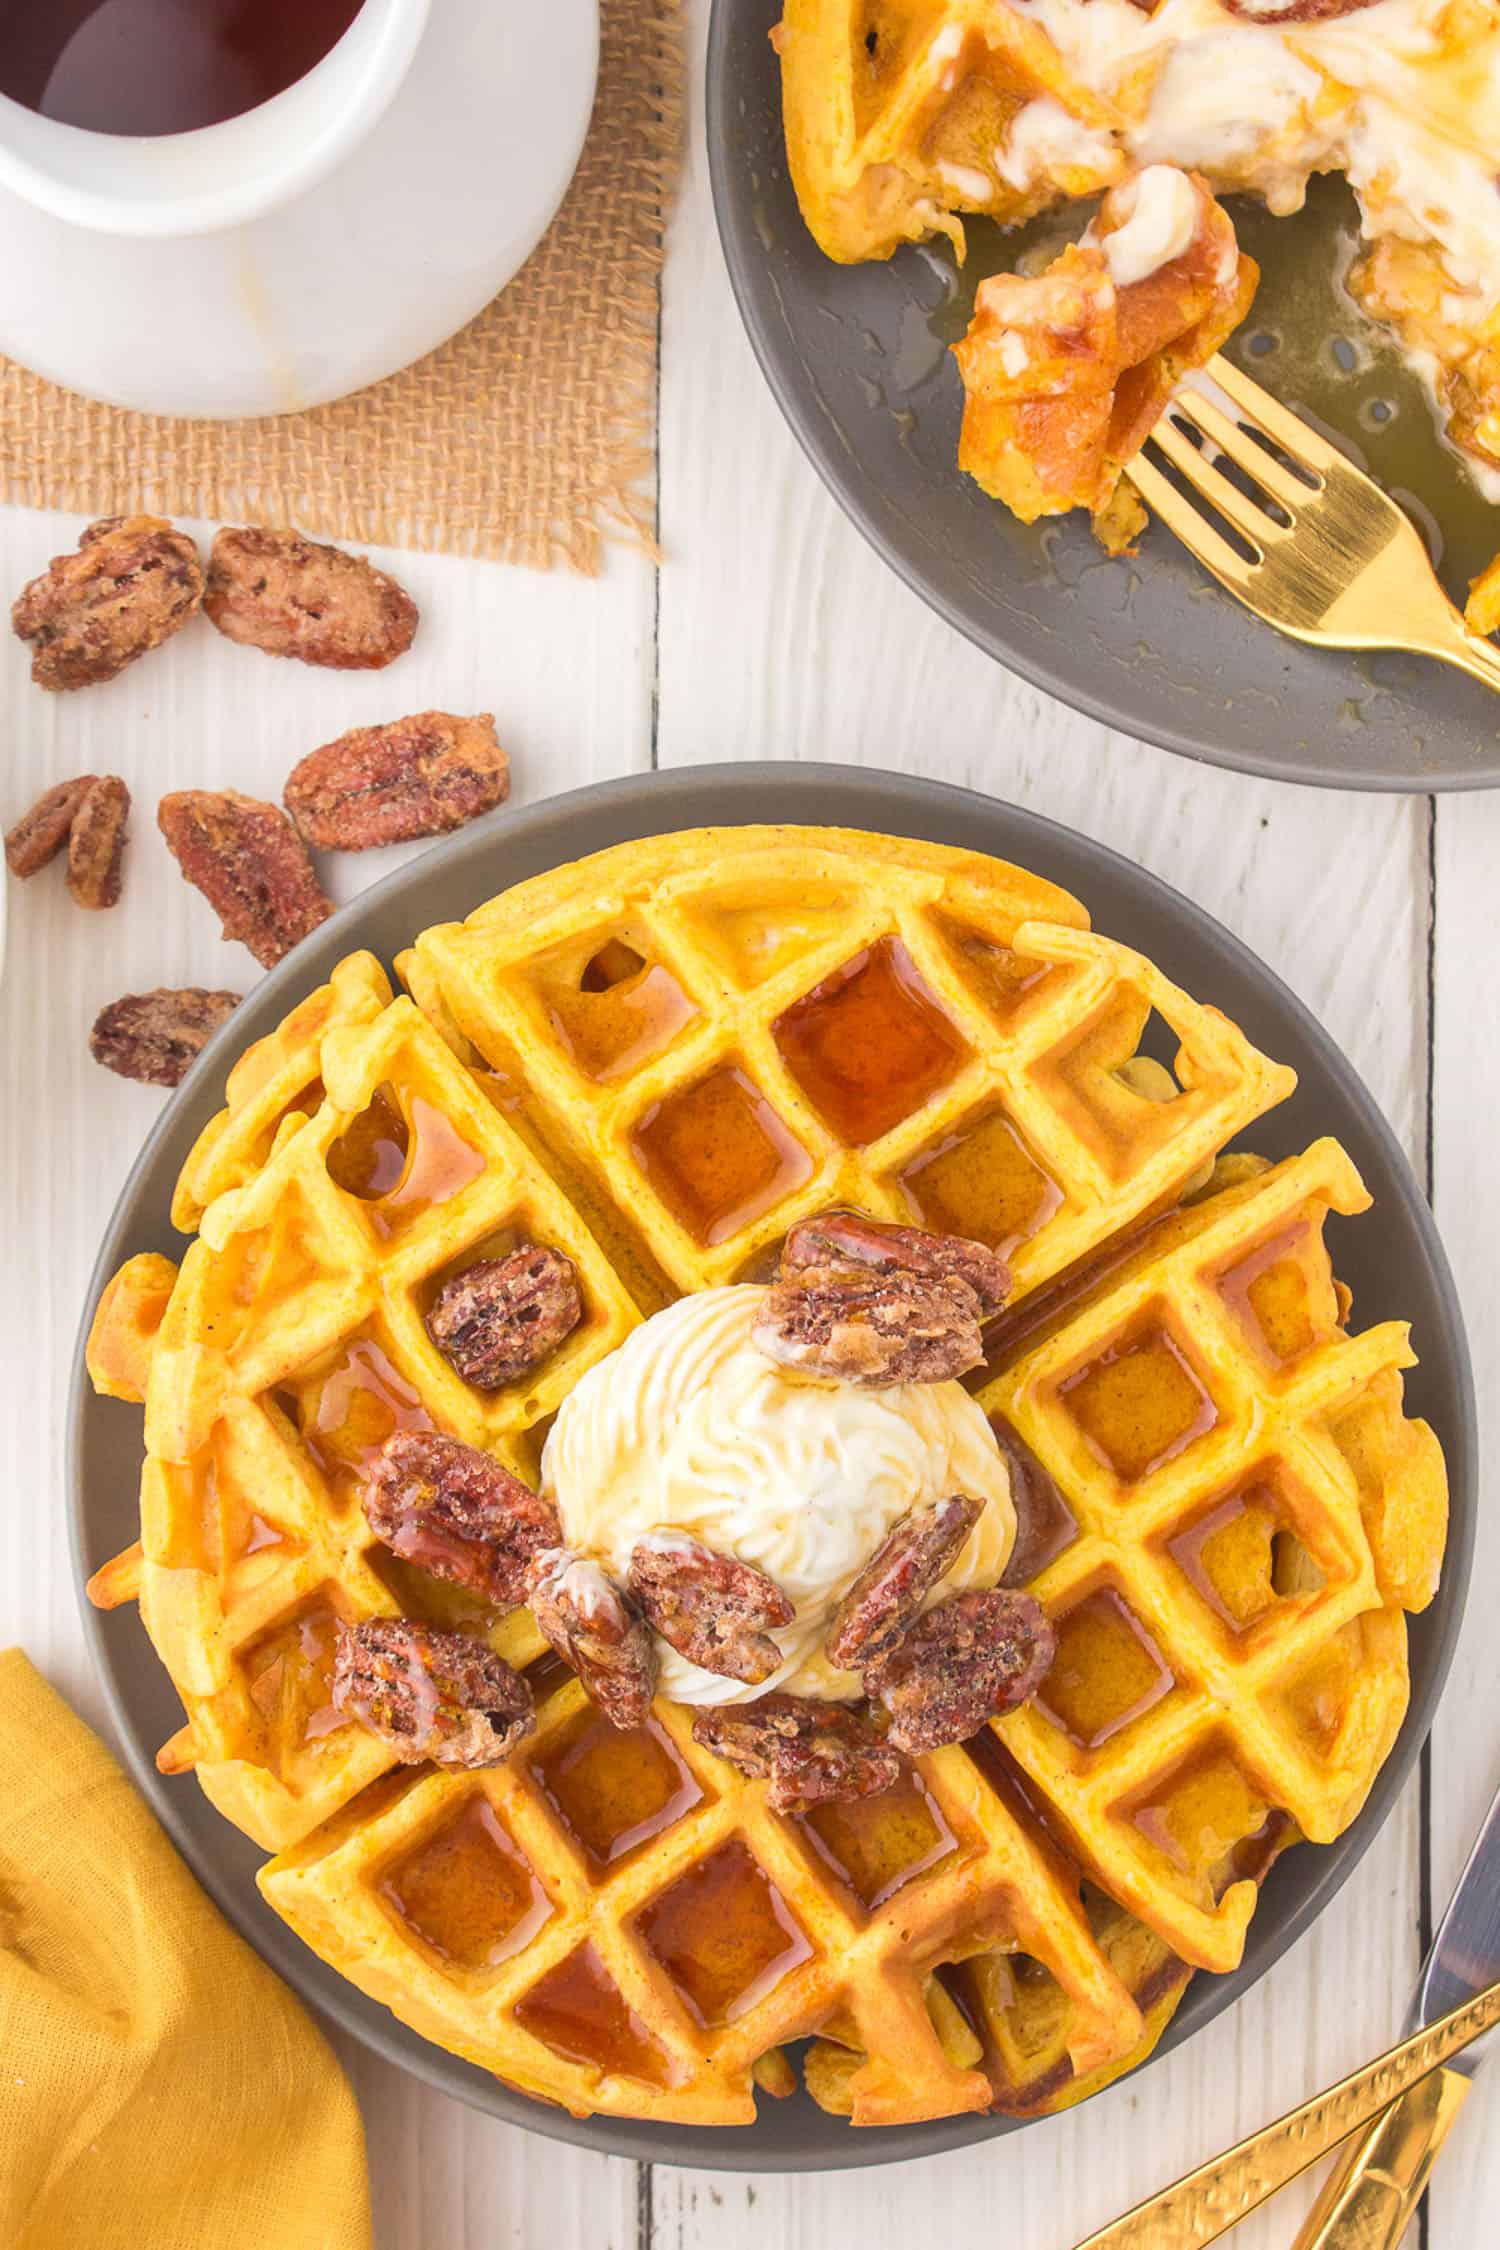 waffles with ice cream on top